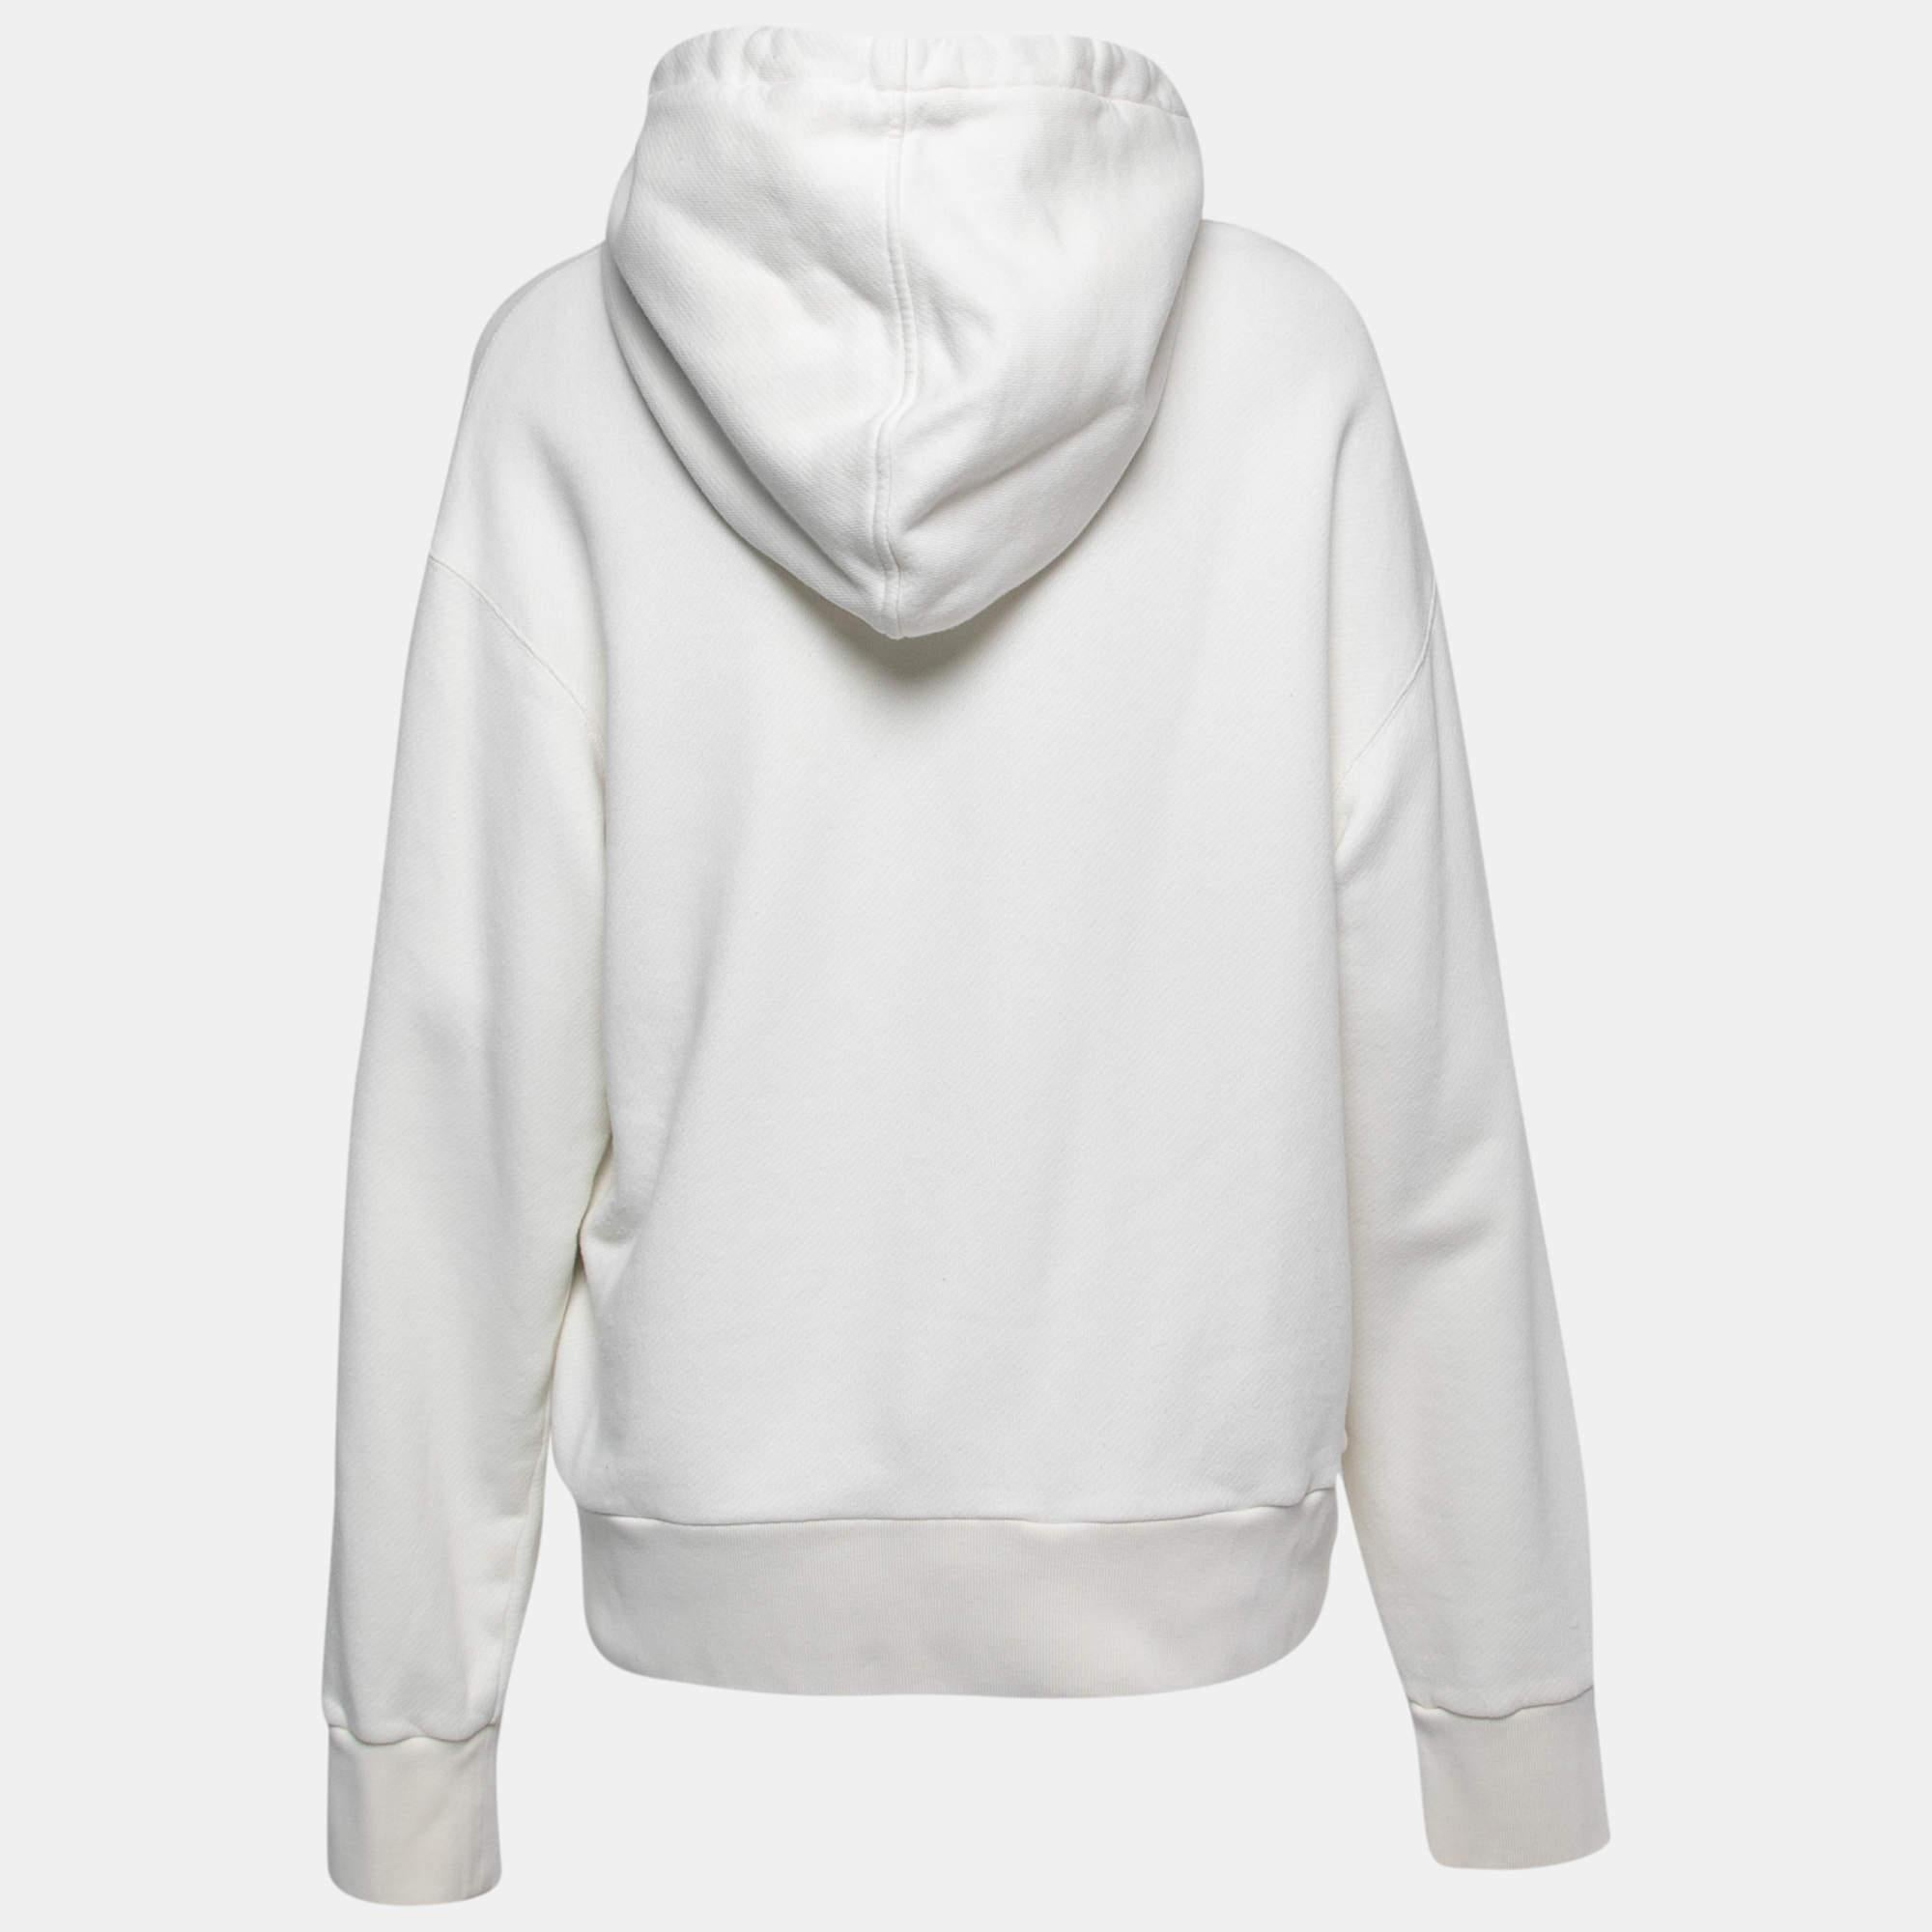 How fabulous does this designer hoodie look! It is made of cotton and features long sleeves. Pair it with pants and sneakers for a cool attire.

